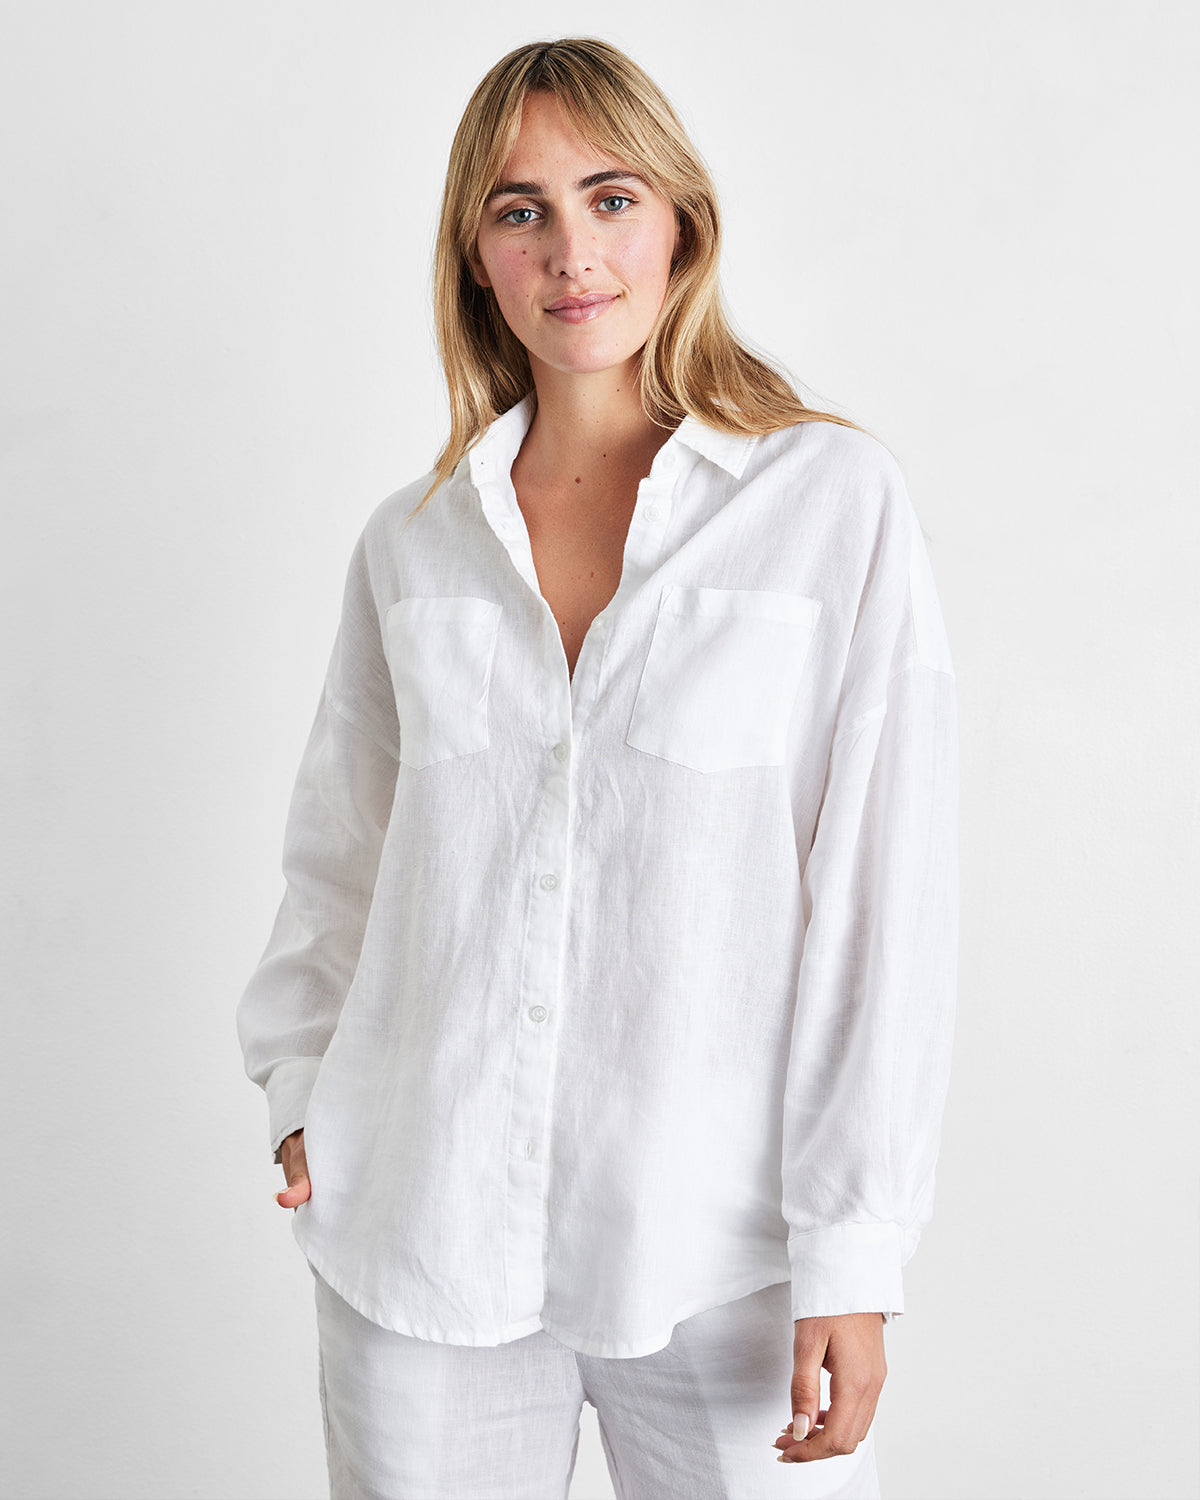 Women's Comfortable New Thread Cloth Pure Cotton Front Button